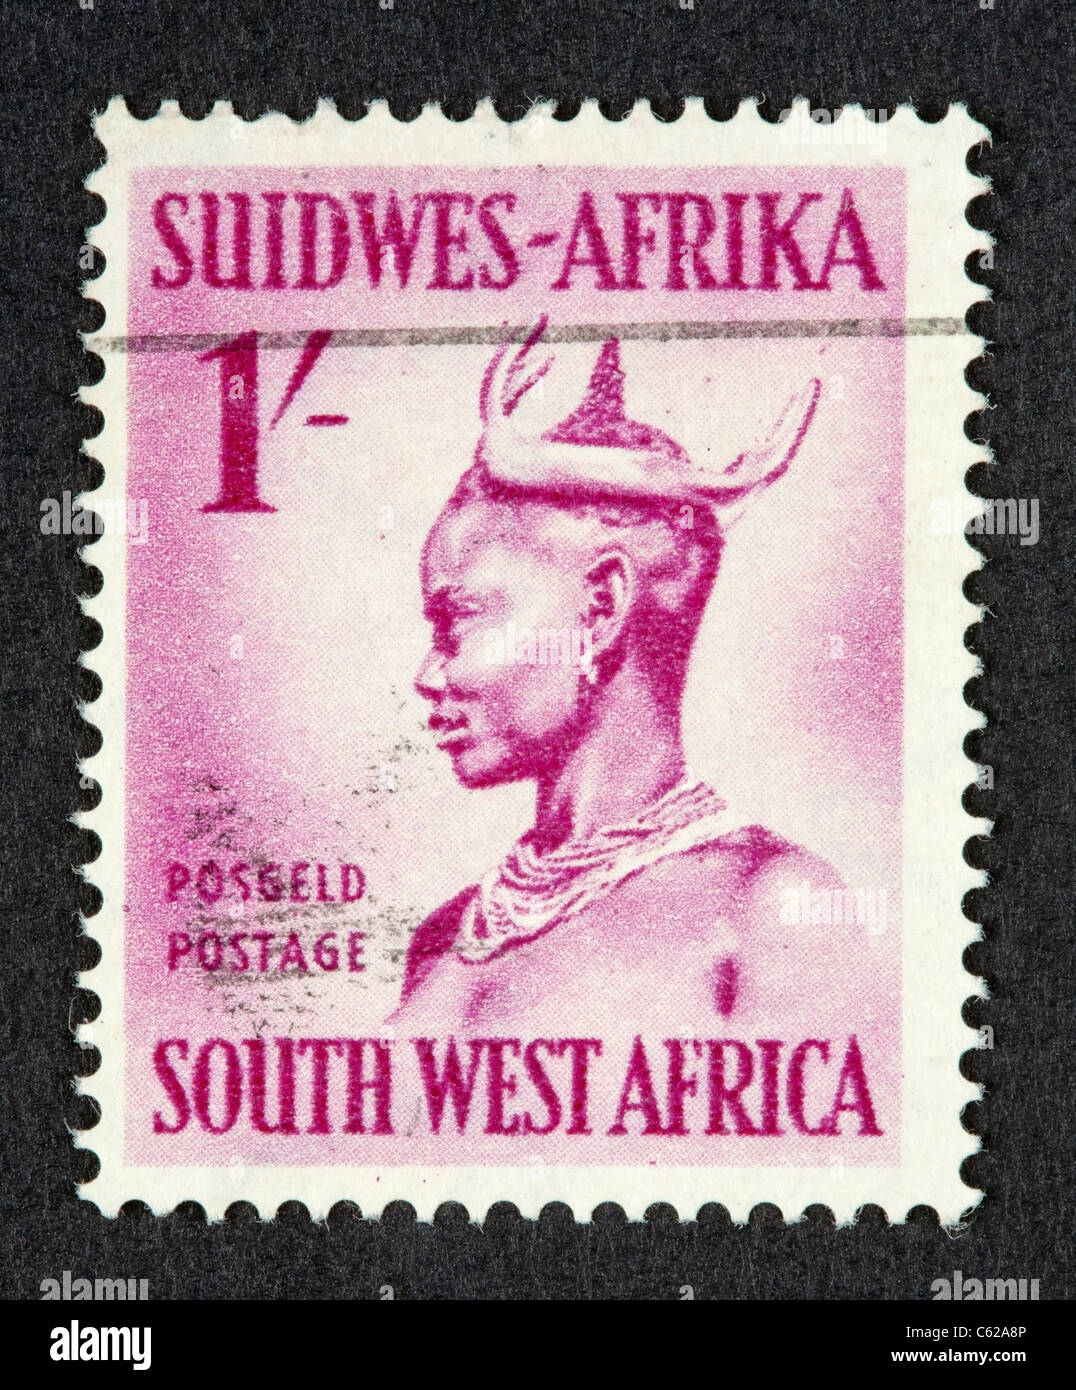 South-West Africa postage stamp Stock Photo